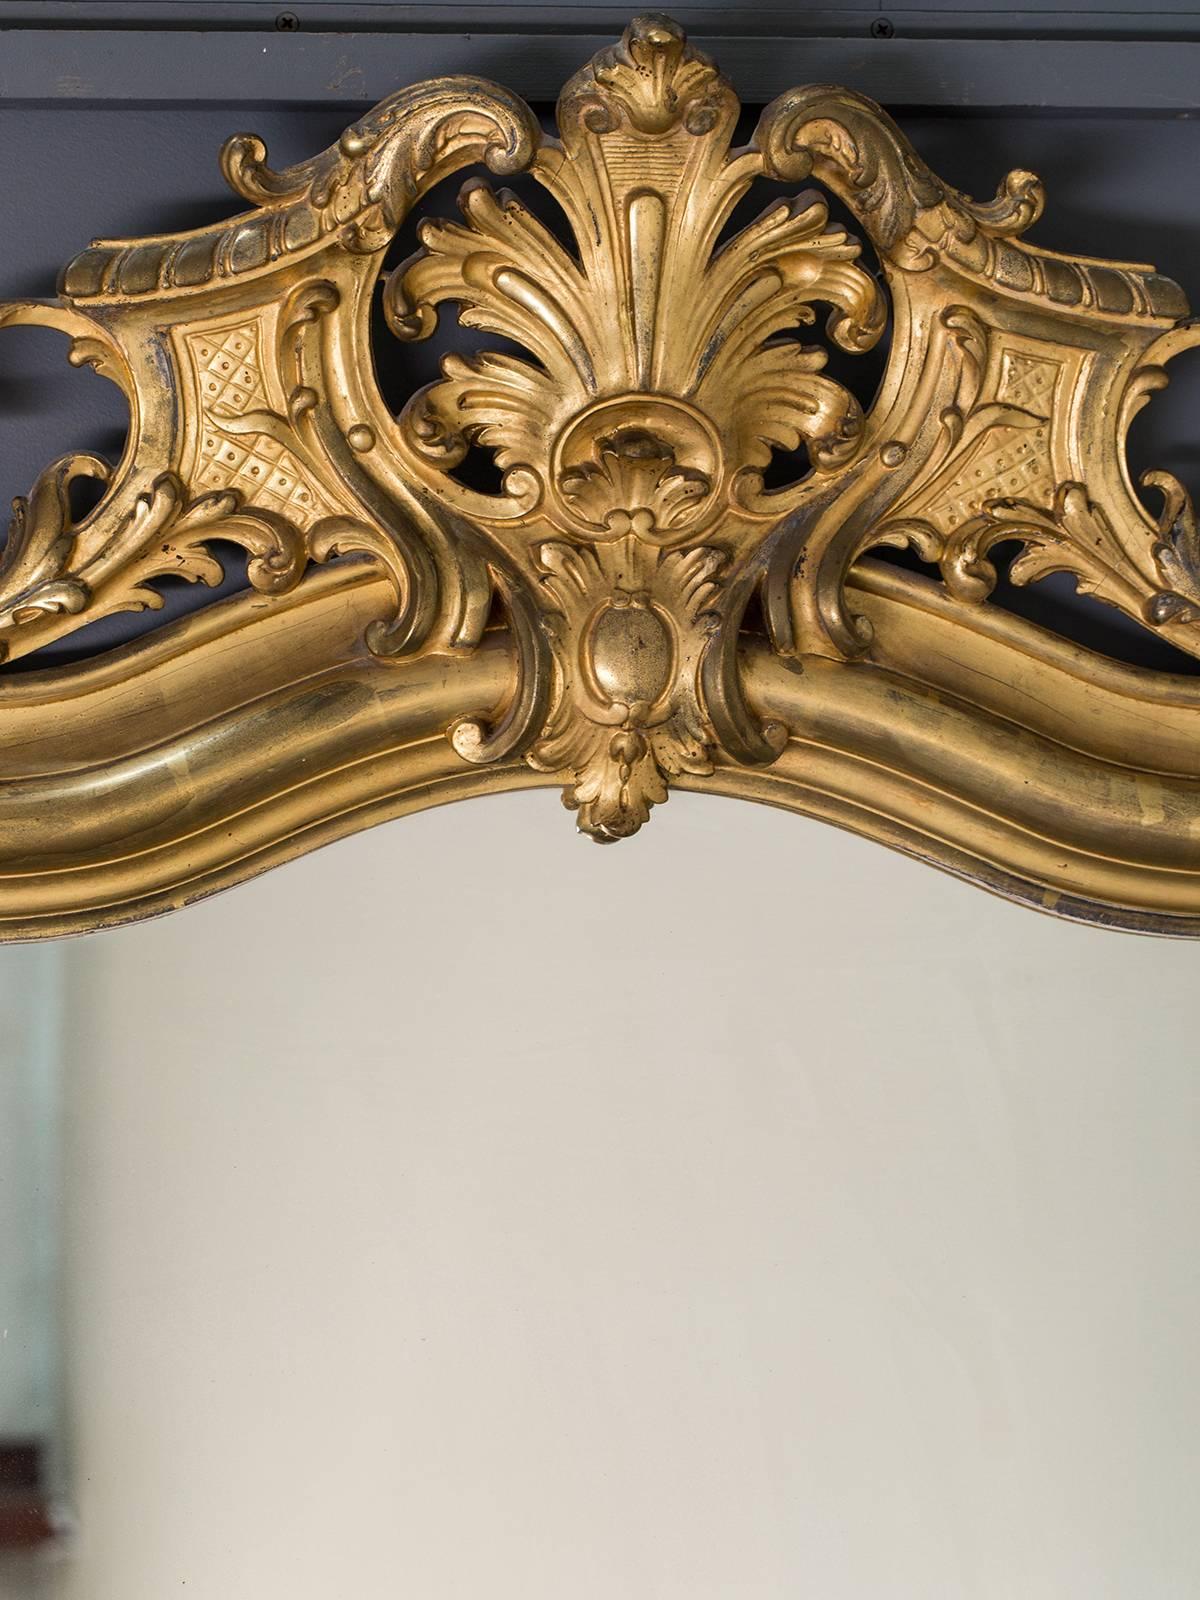 This handsome antique French Louis Philippe gold leaf mirror, circa 1890 has a handsome scale and is topped with a distinctive cartouche. The elaborate and symmetrical shape of the cartouche is quite striking as is the elevation of the original